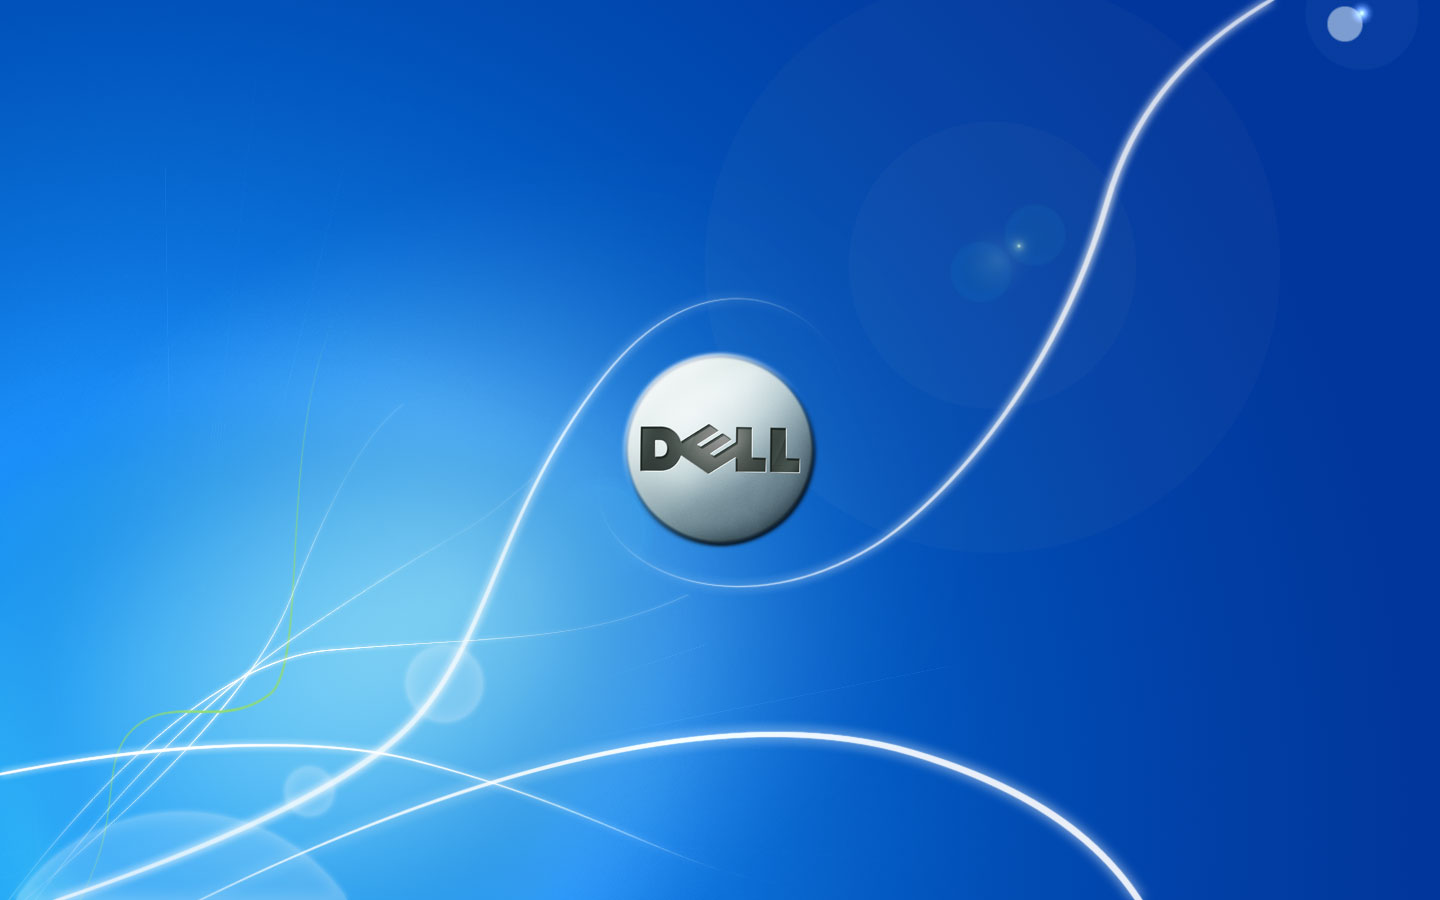 dell wallpaper backgrounds